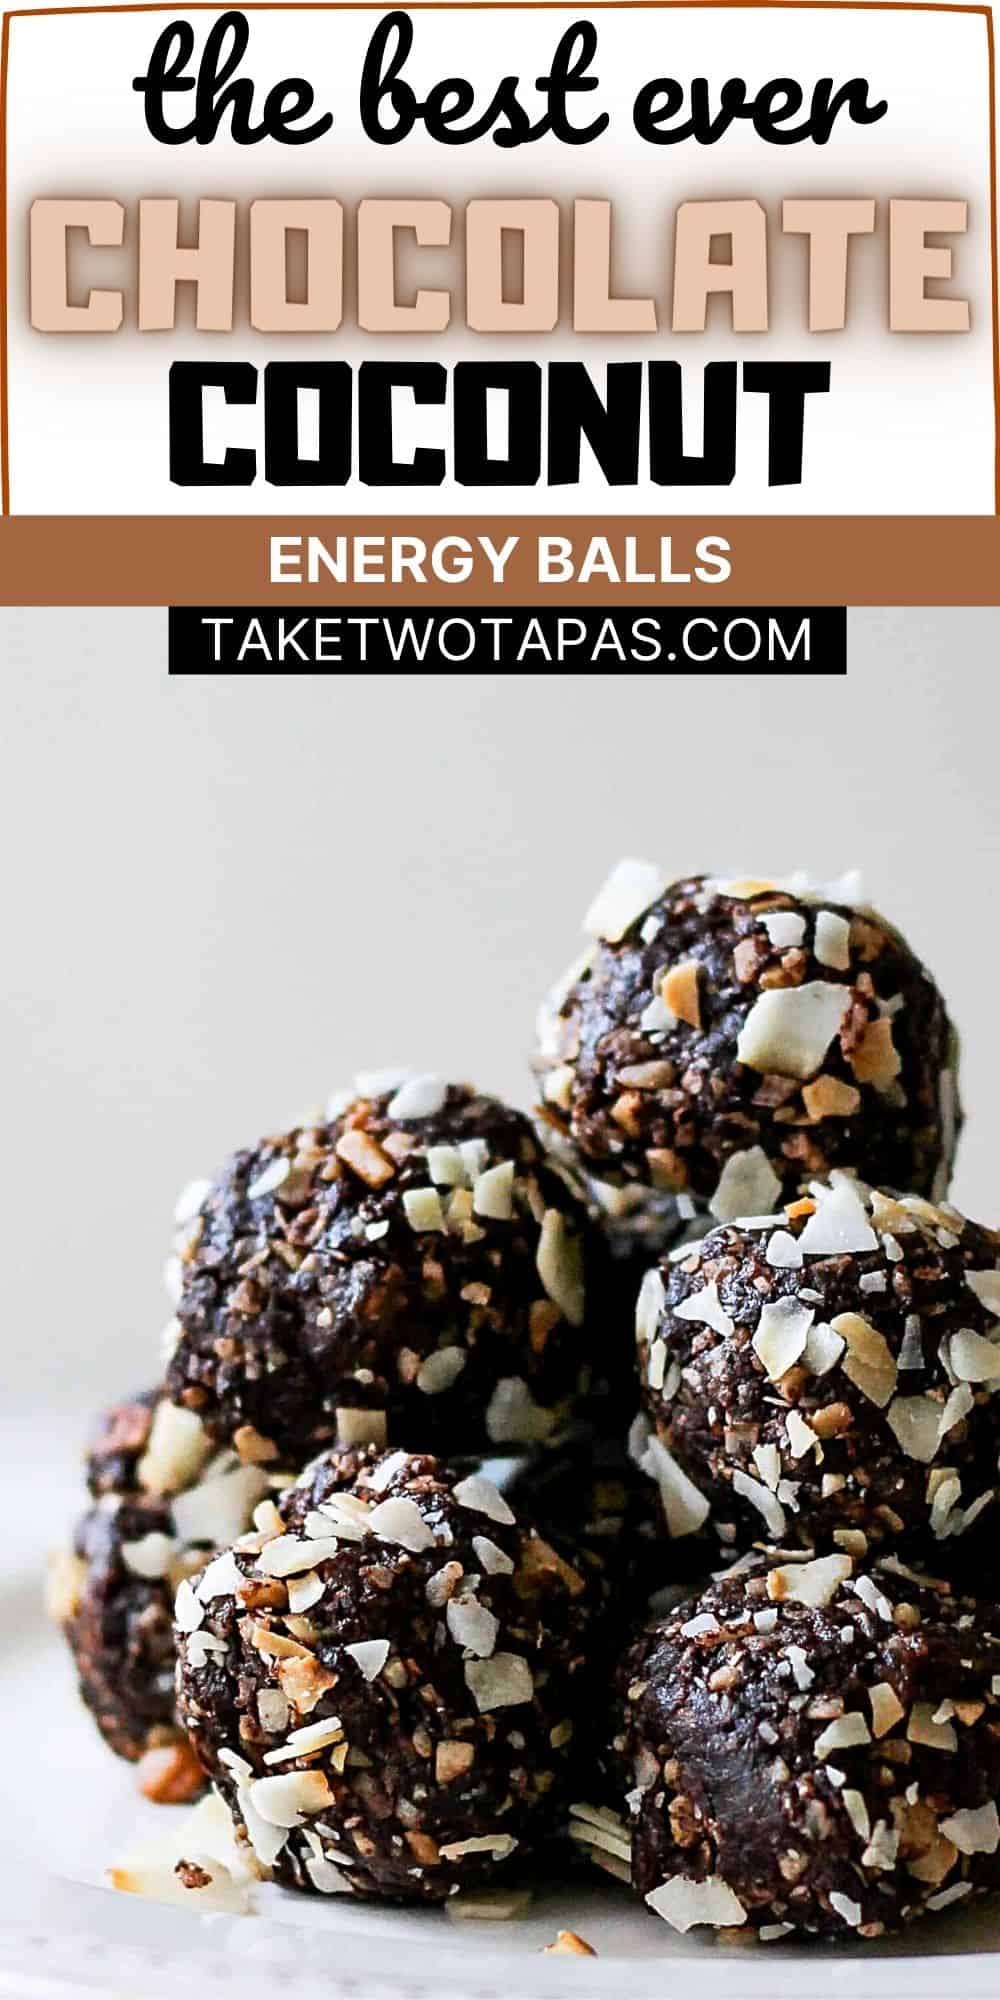 energy balls on cake plate with text "best ever chocolate coconut energy balls"